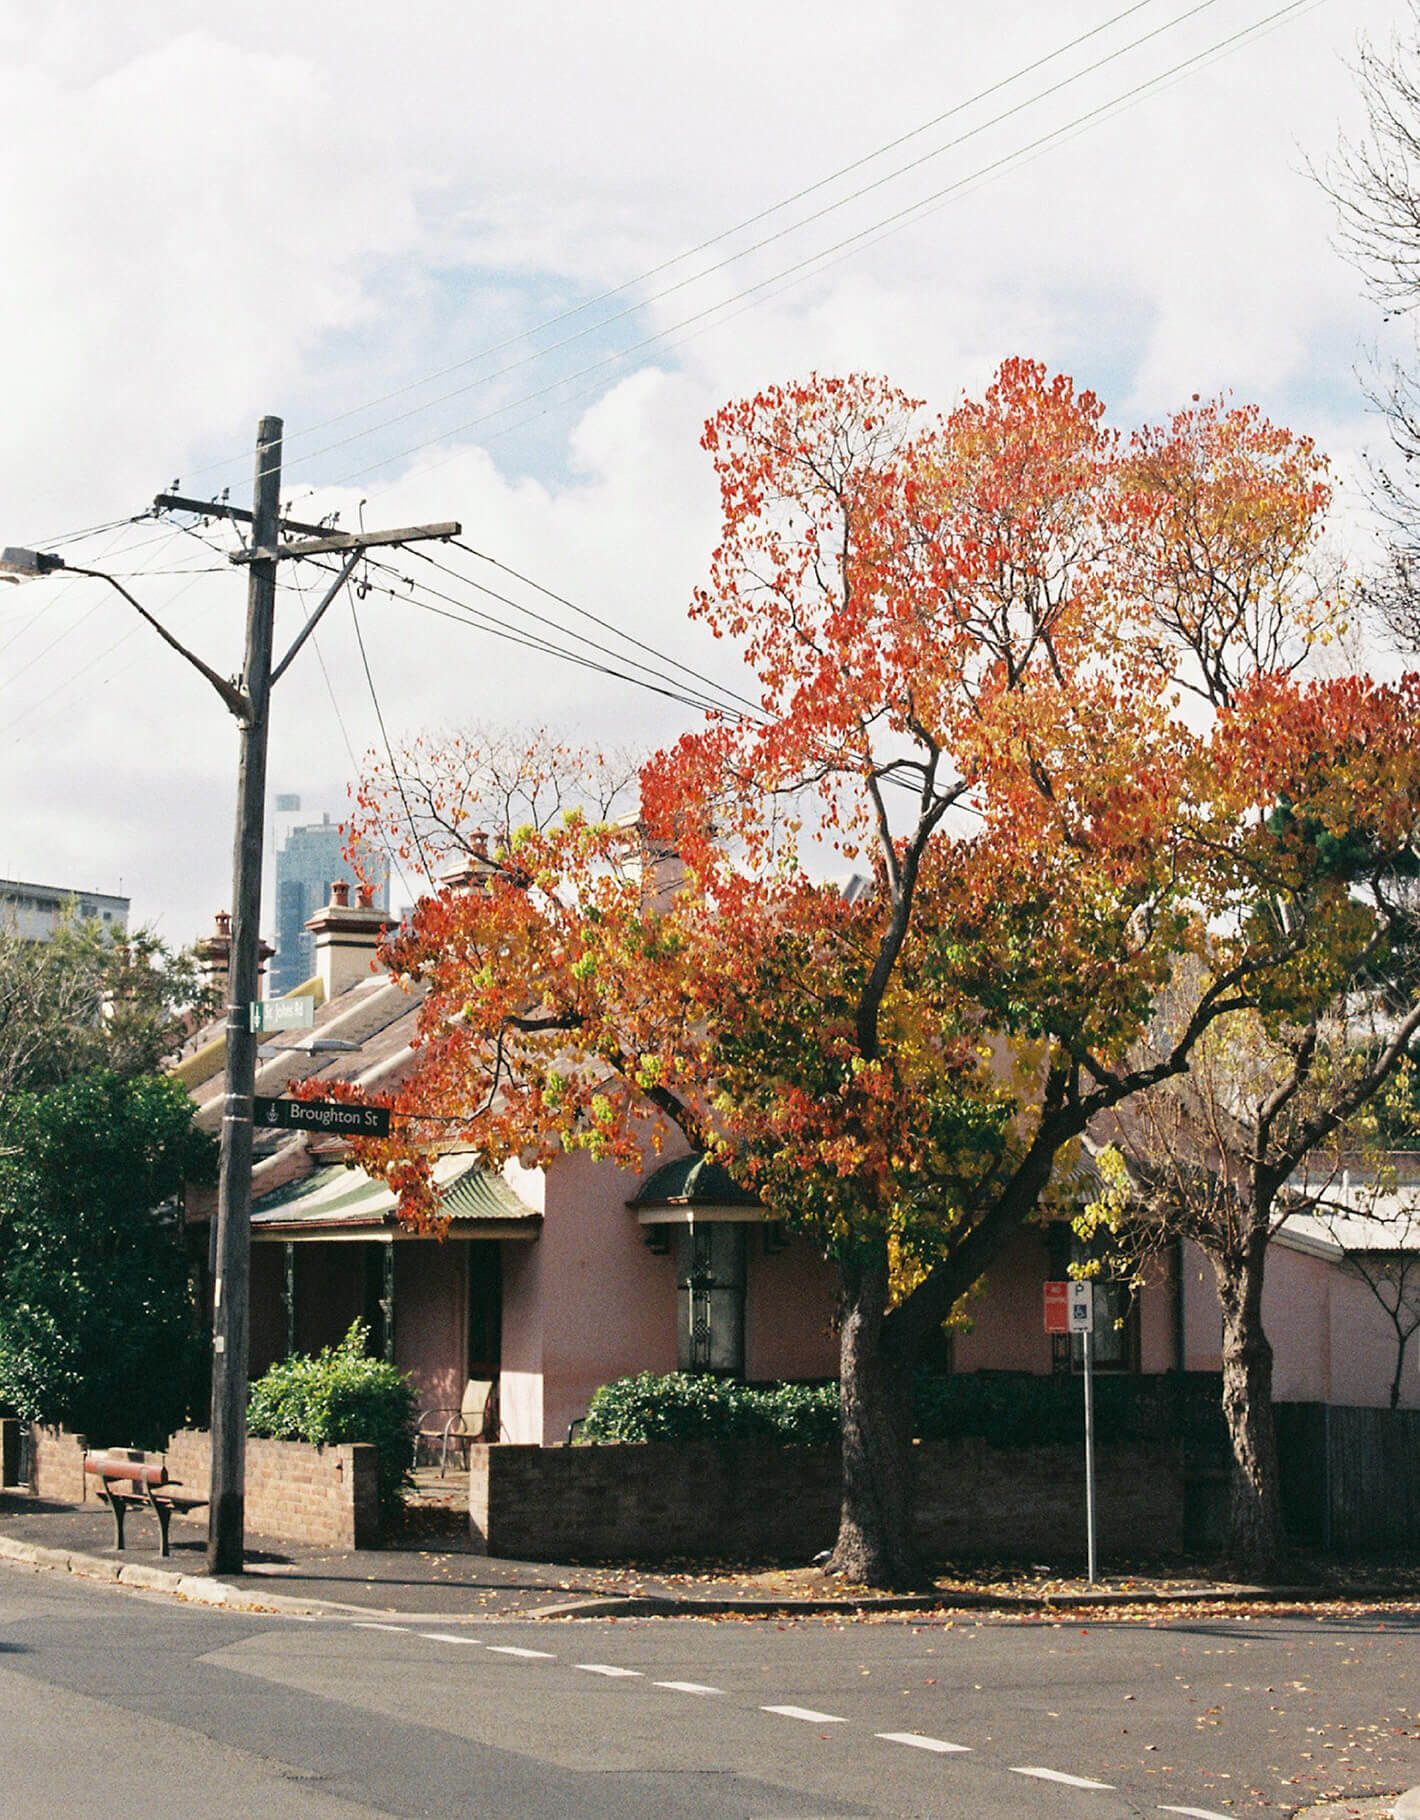 Flame tree blooming on Sydney street with delicate film photography grain